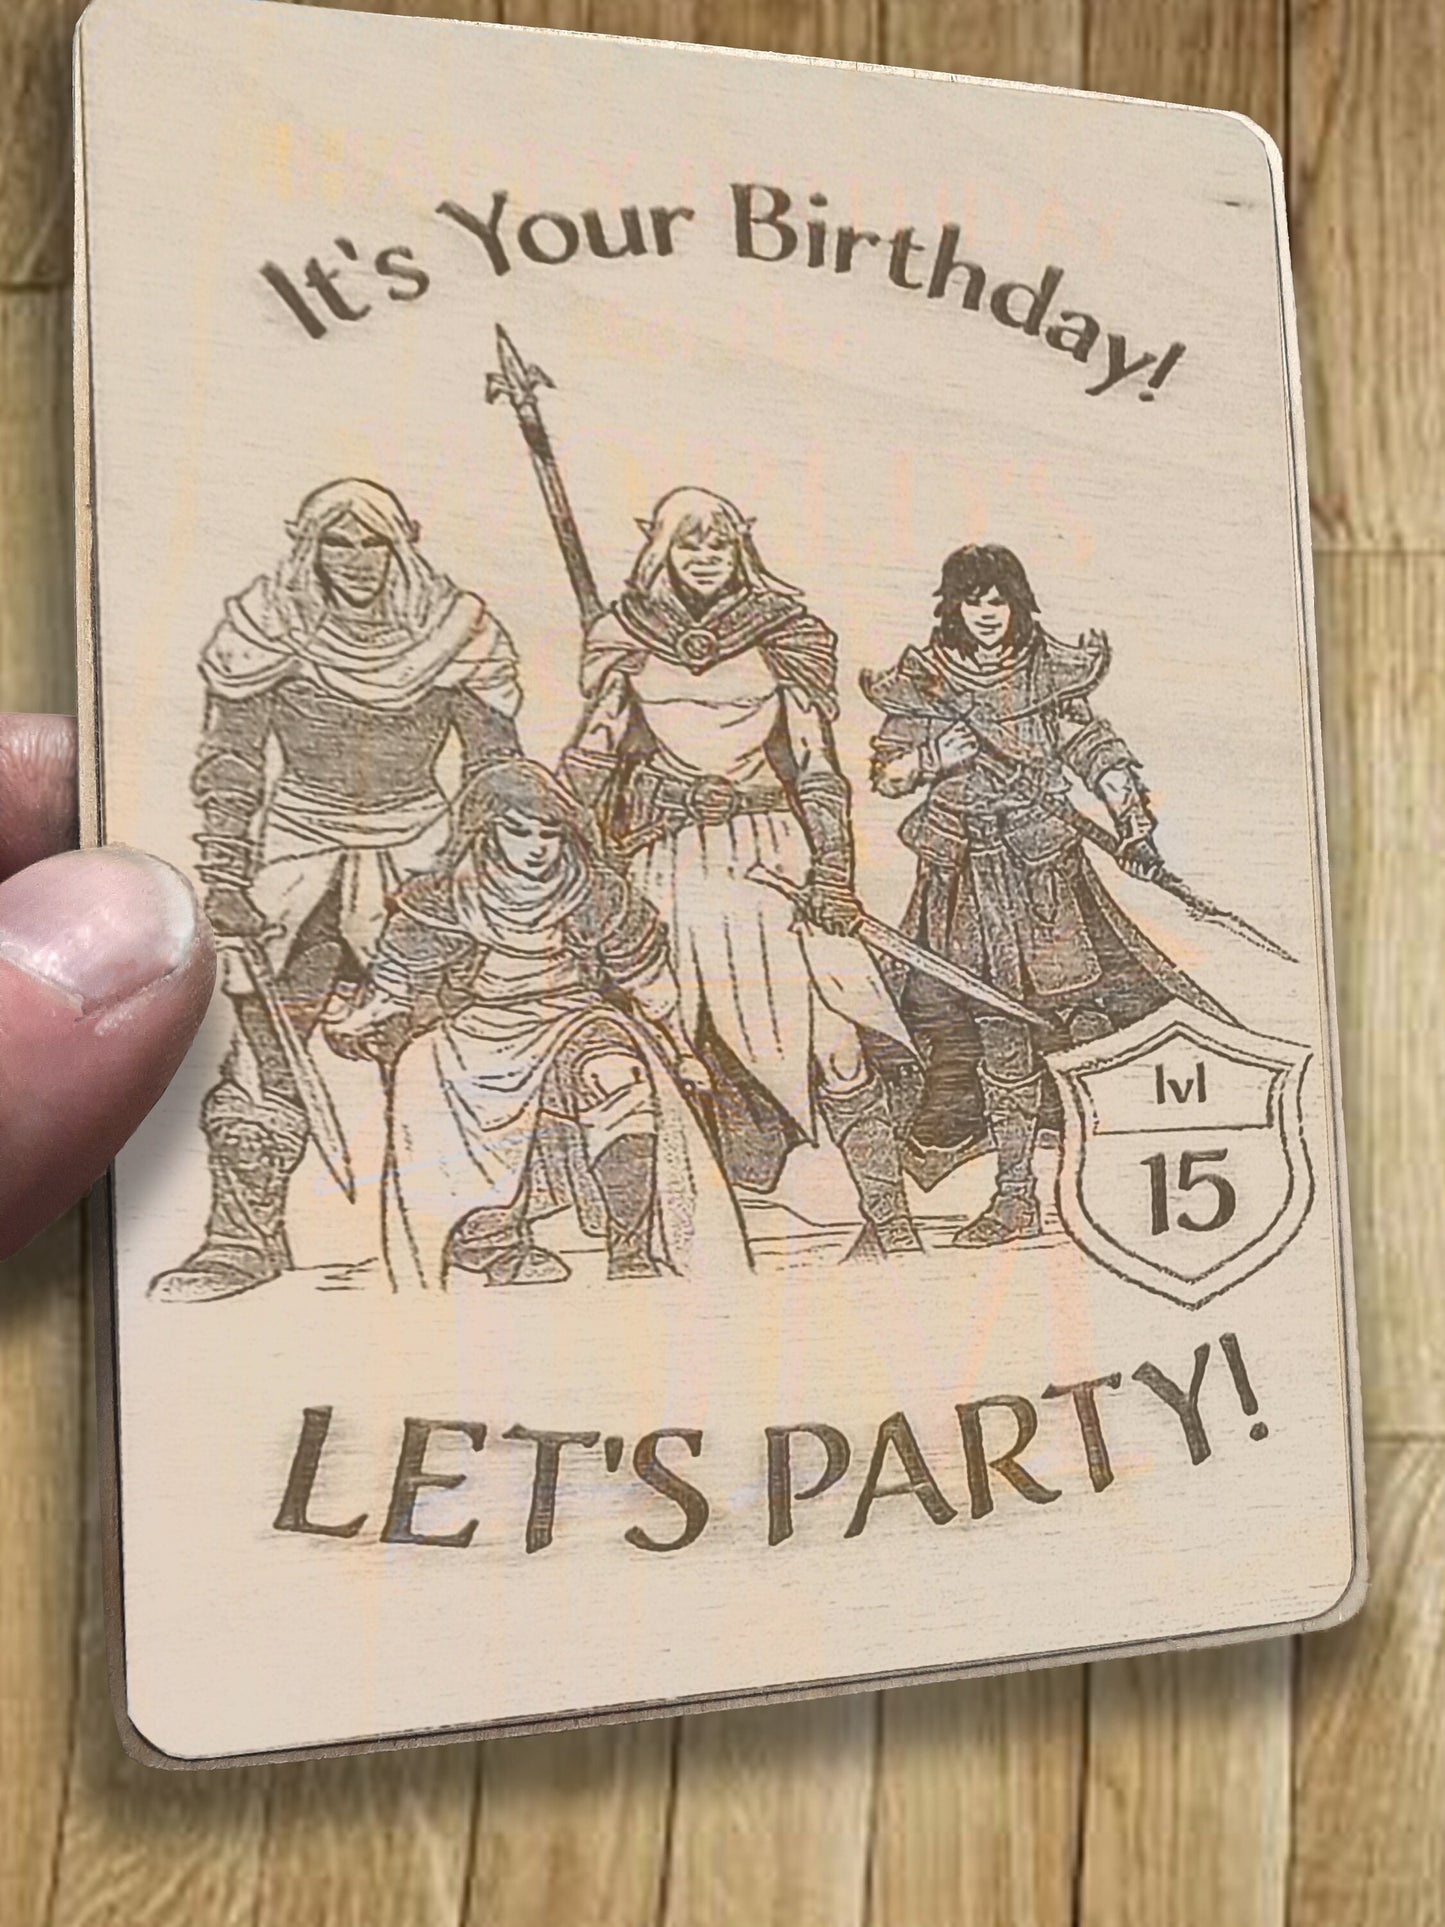 It's Your Birthday LET'S PARTY! - Birthday Card - Humorous birthday card, engraved wood, rpg gamer gift, role-playing games d&d dnd